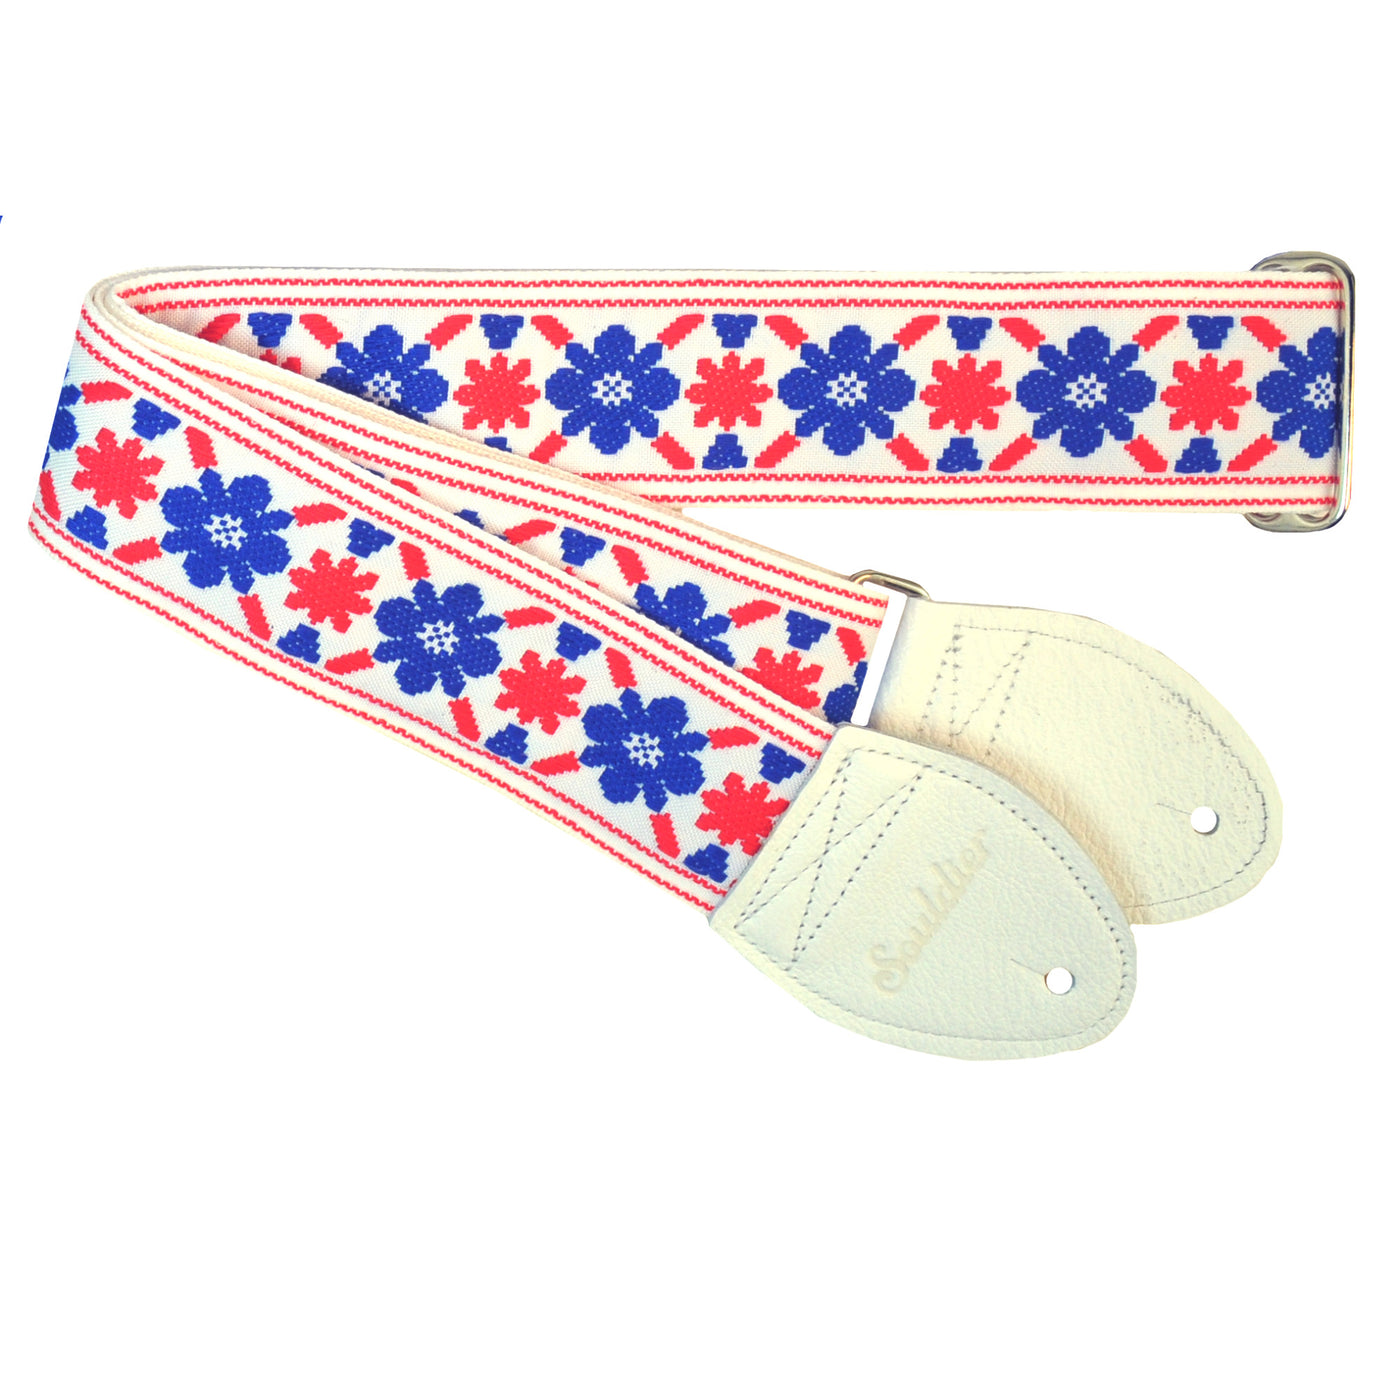 Souldier GS1067WH02WH - Handmade Seatbelt Guitar Strap for Bass, Electric or Acoustic Guitar, 2 Inches Wide and Adjustable Length from 30" to 63"  Made in the USA, Tulip, Cream